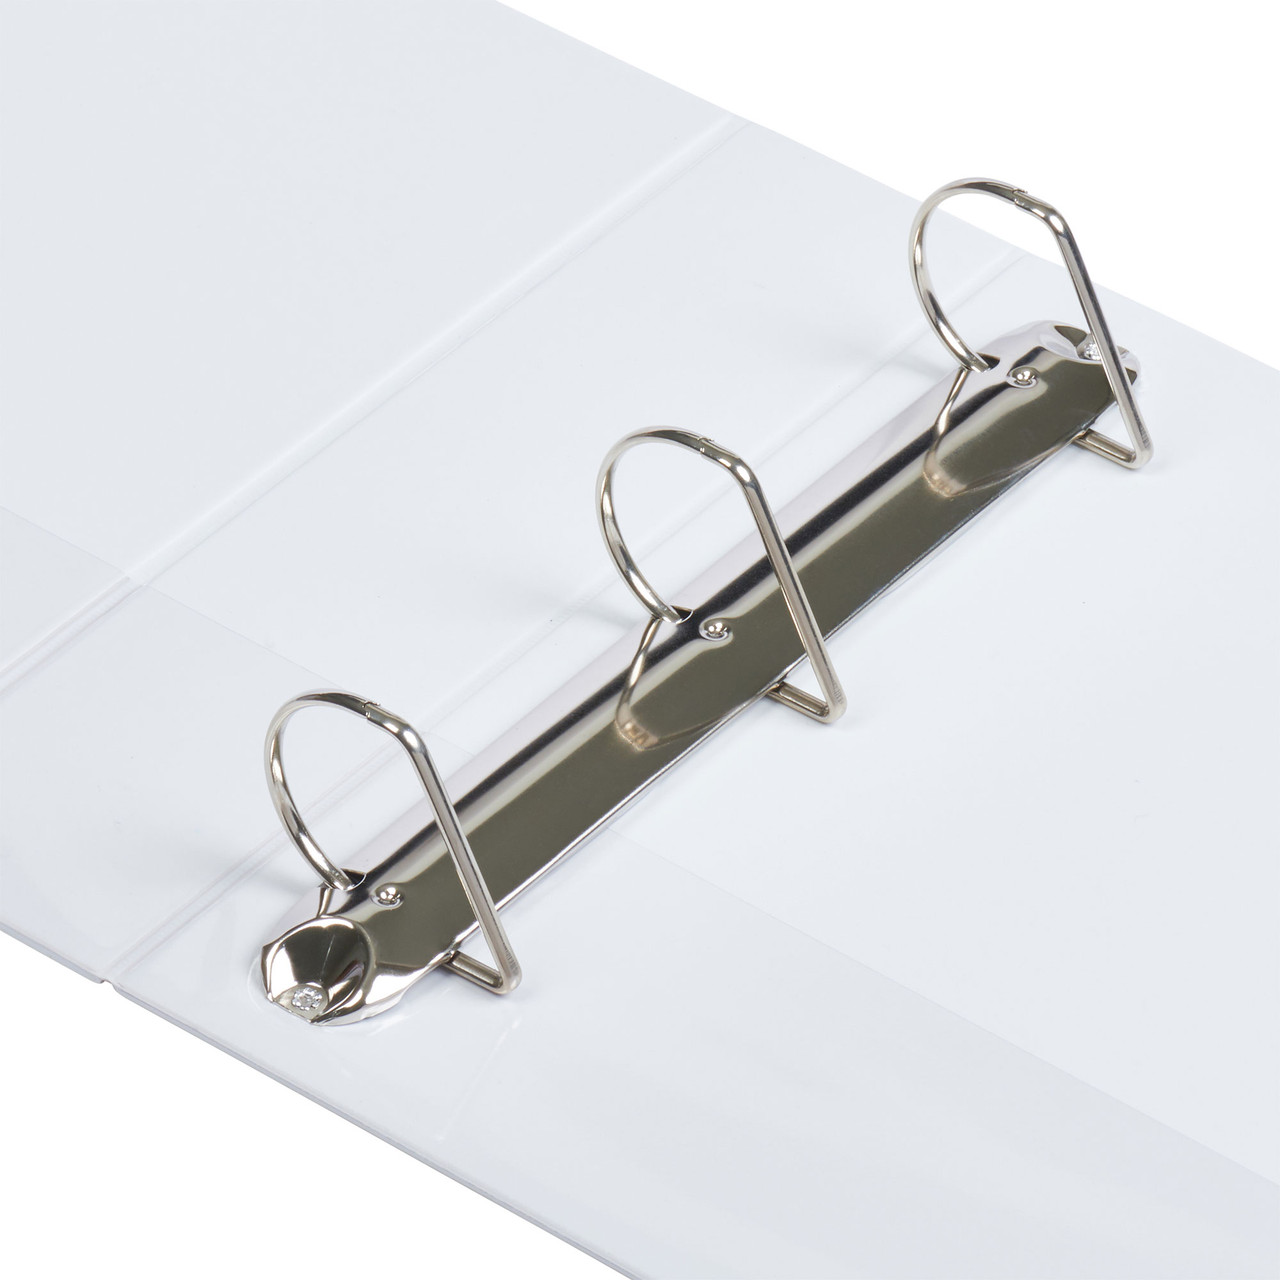 A4 3 Ring Binder 2 Inch White | Free Shipping On Orders Of $500